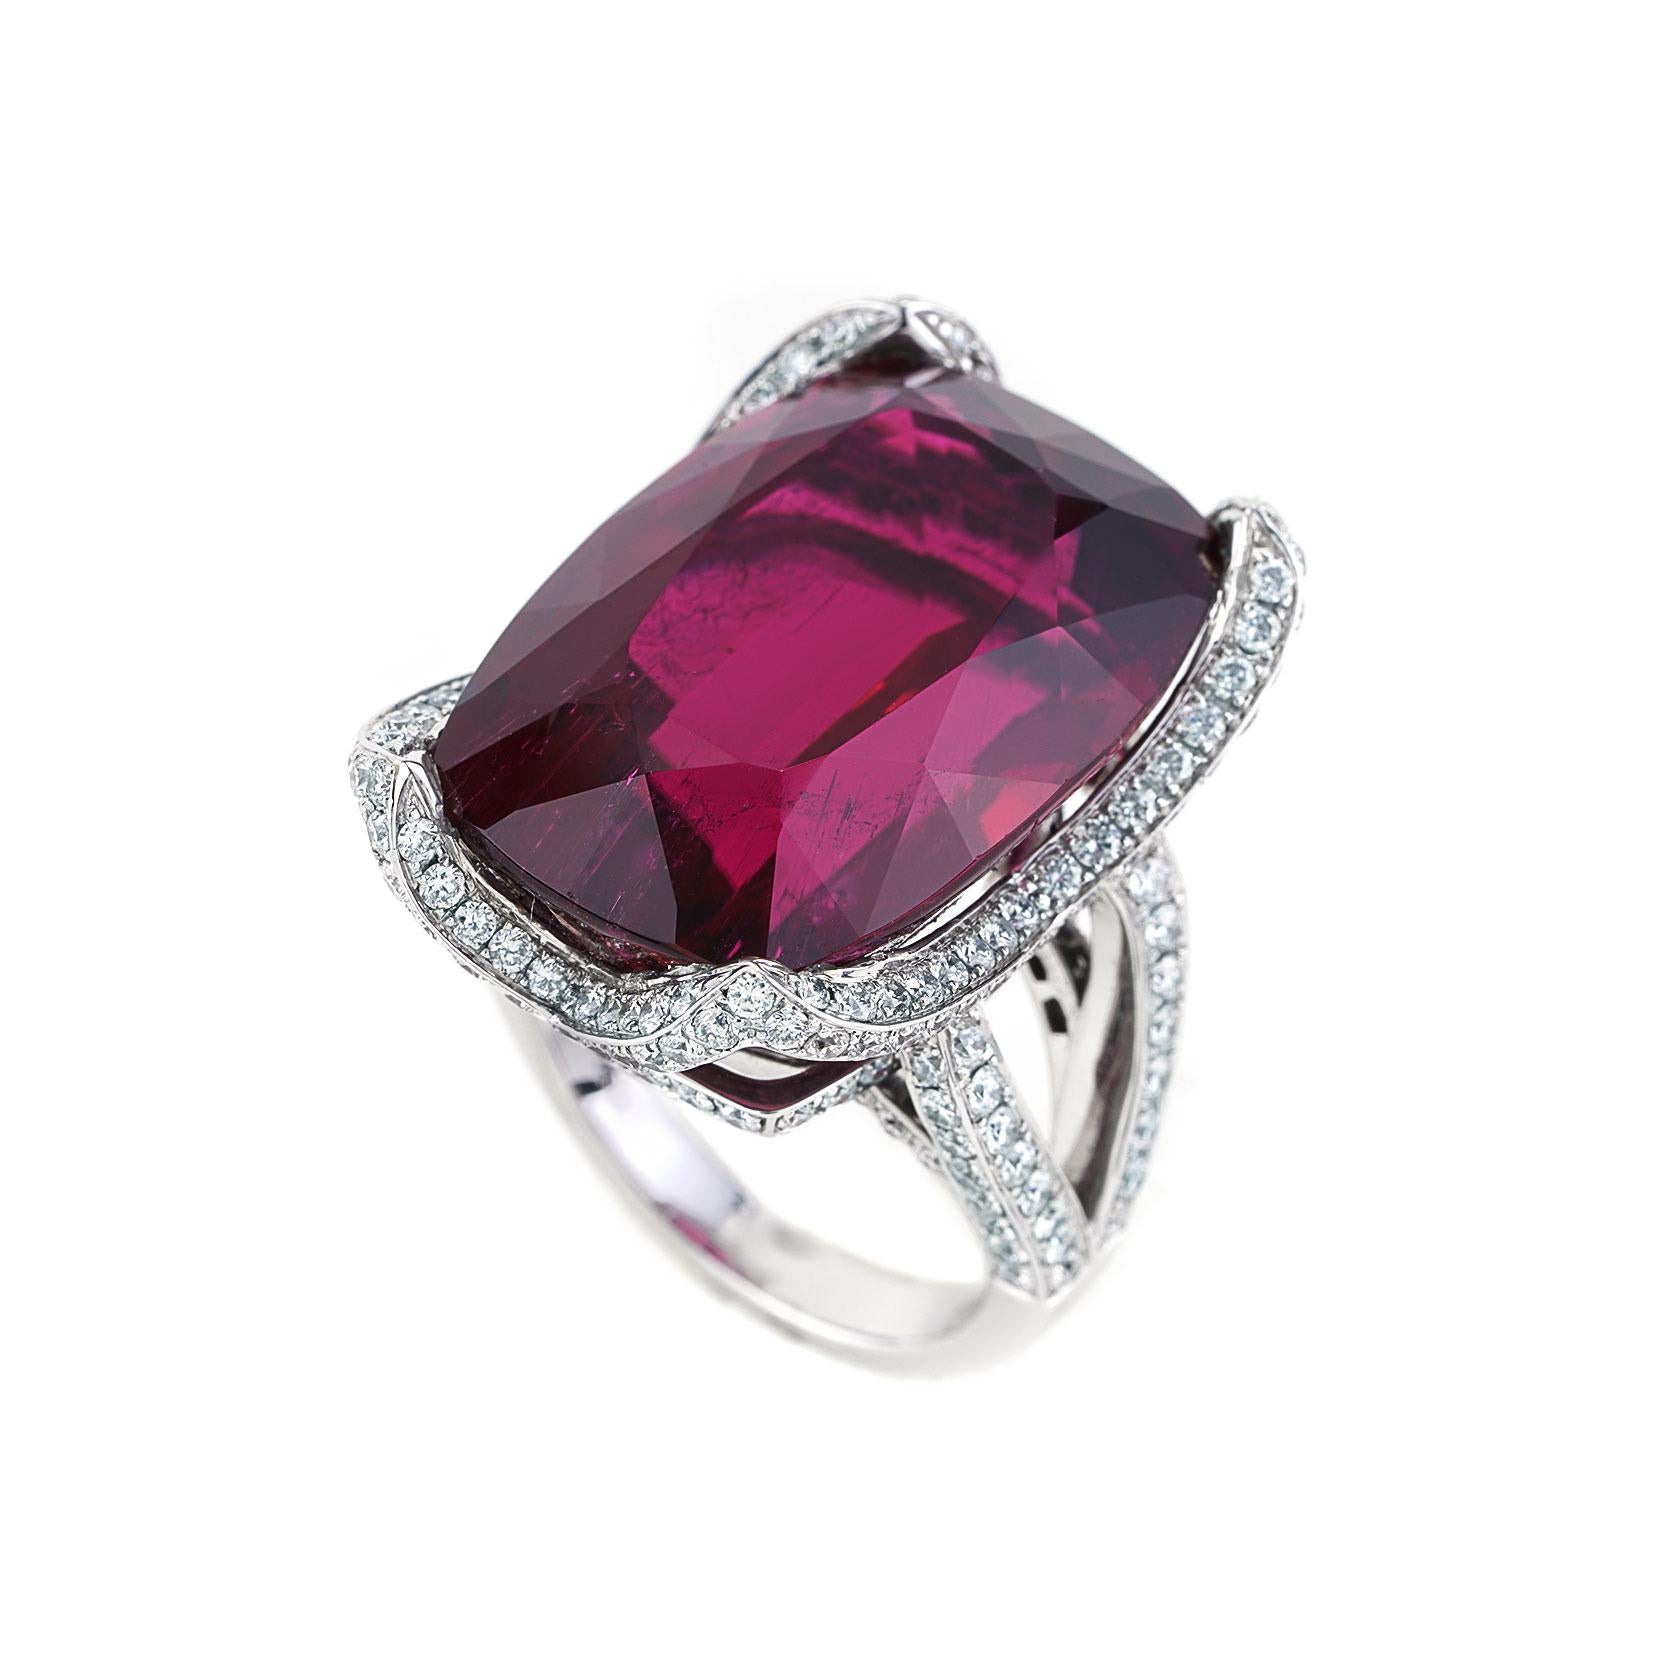 Women's Very Rare 38.21 Carat Rubellite and Diamond Cocktail Ring in 18K White Gold For Sale